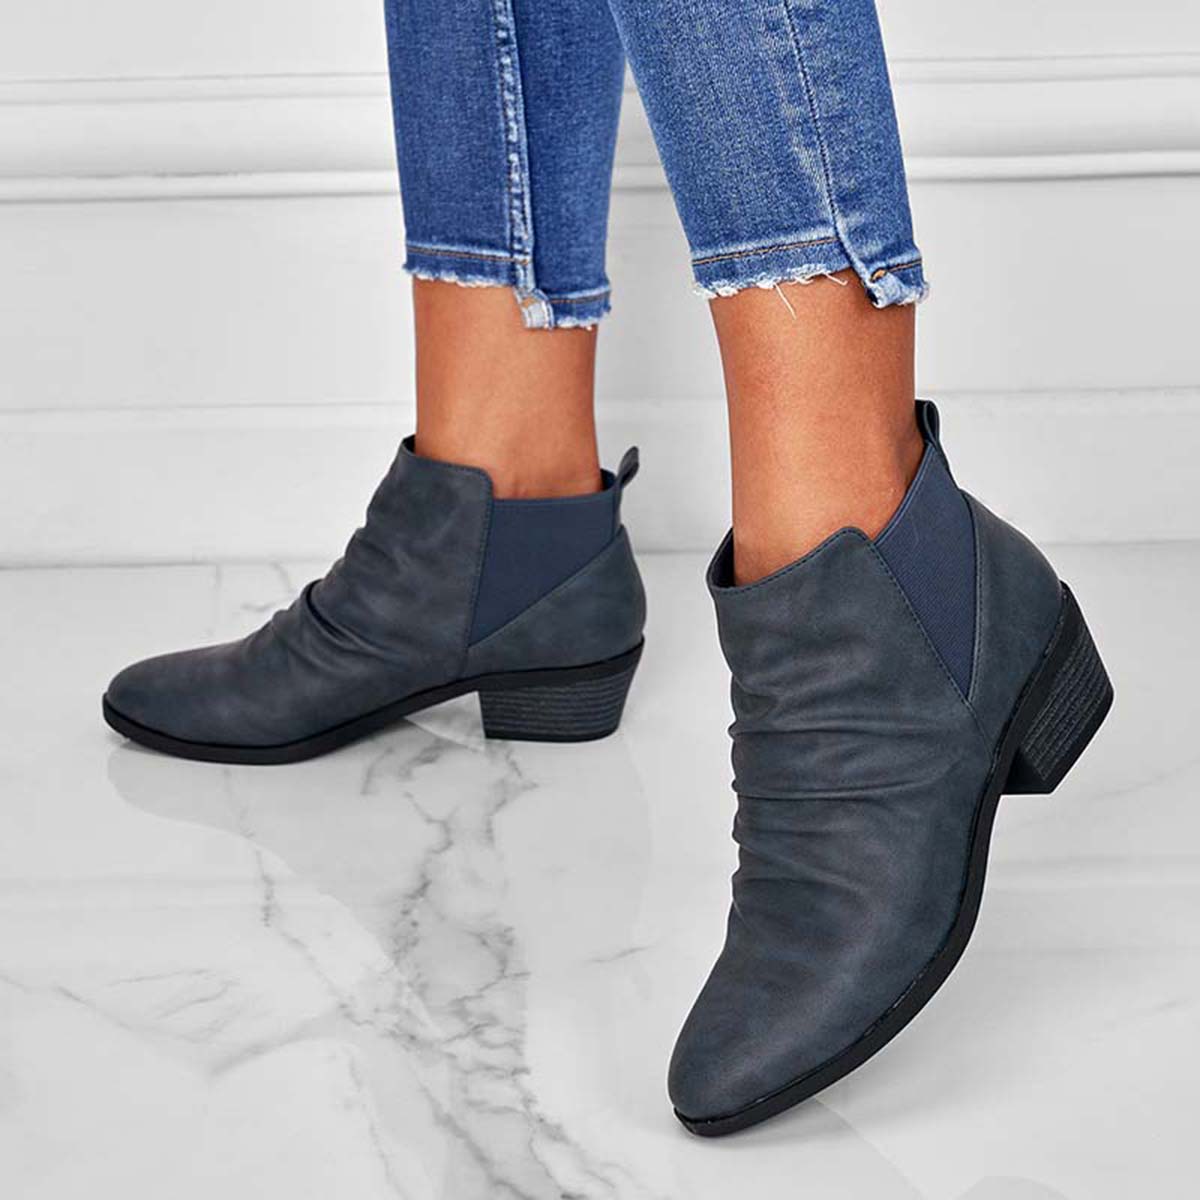 Veooy Round Toe Ruched Booties Stacked Block Heel Ankle Boots